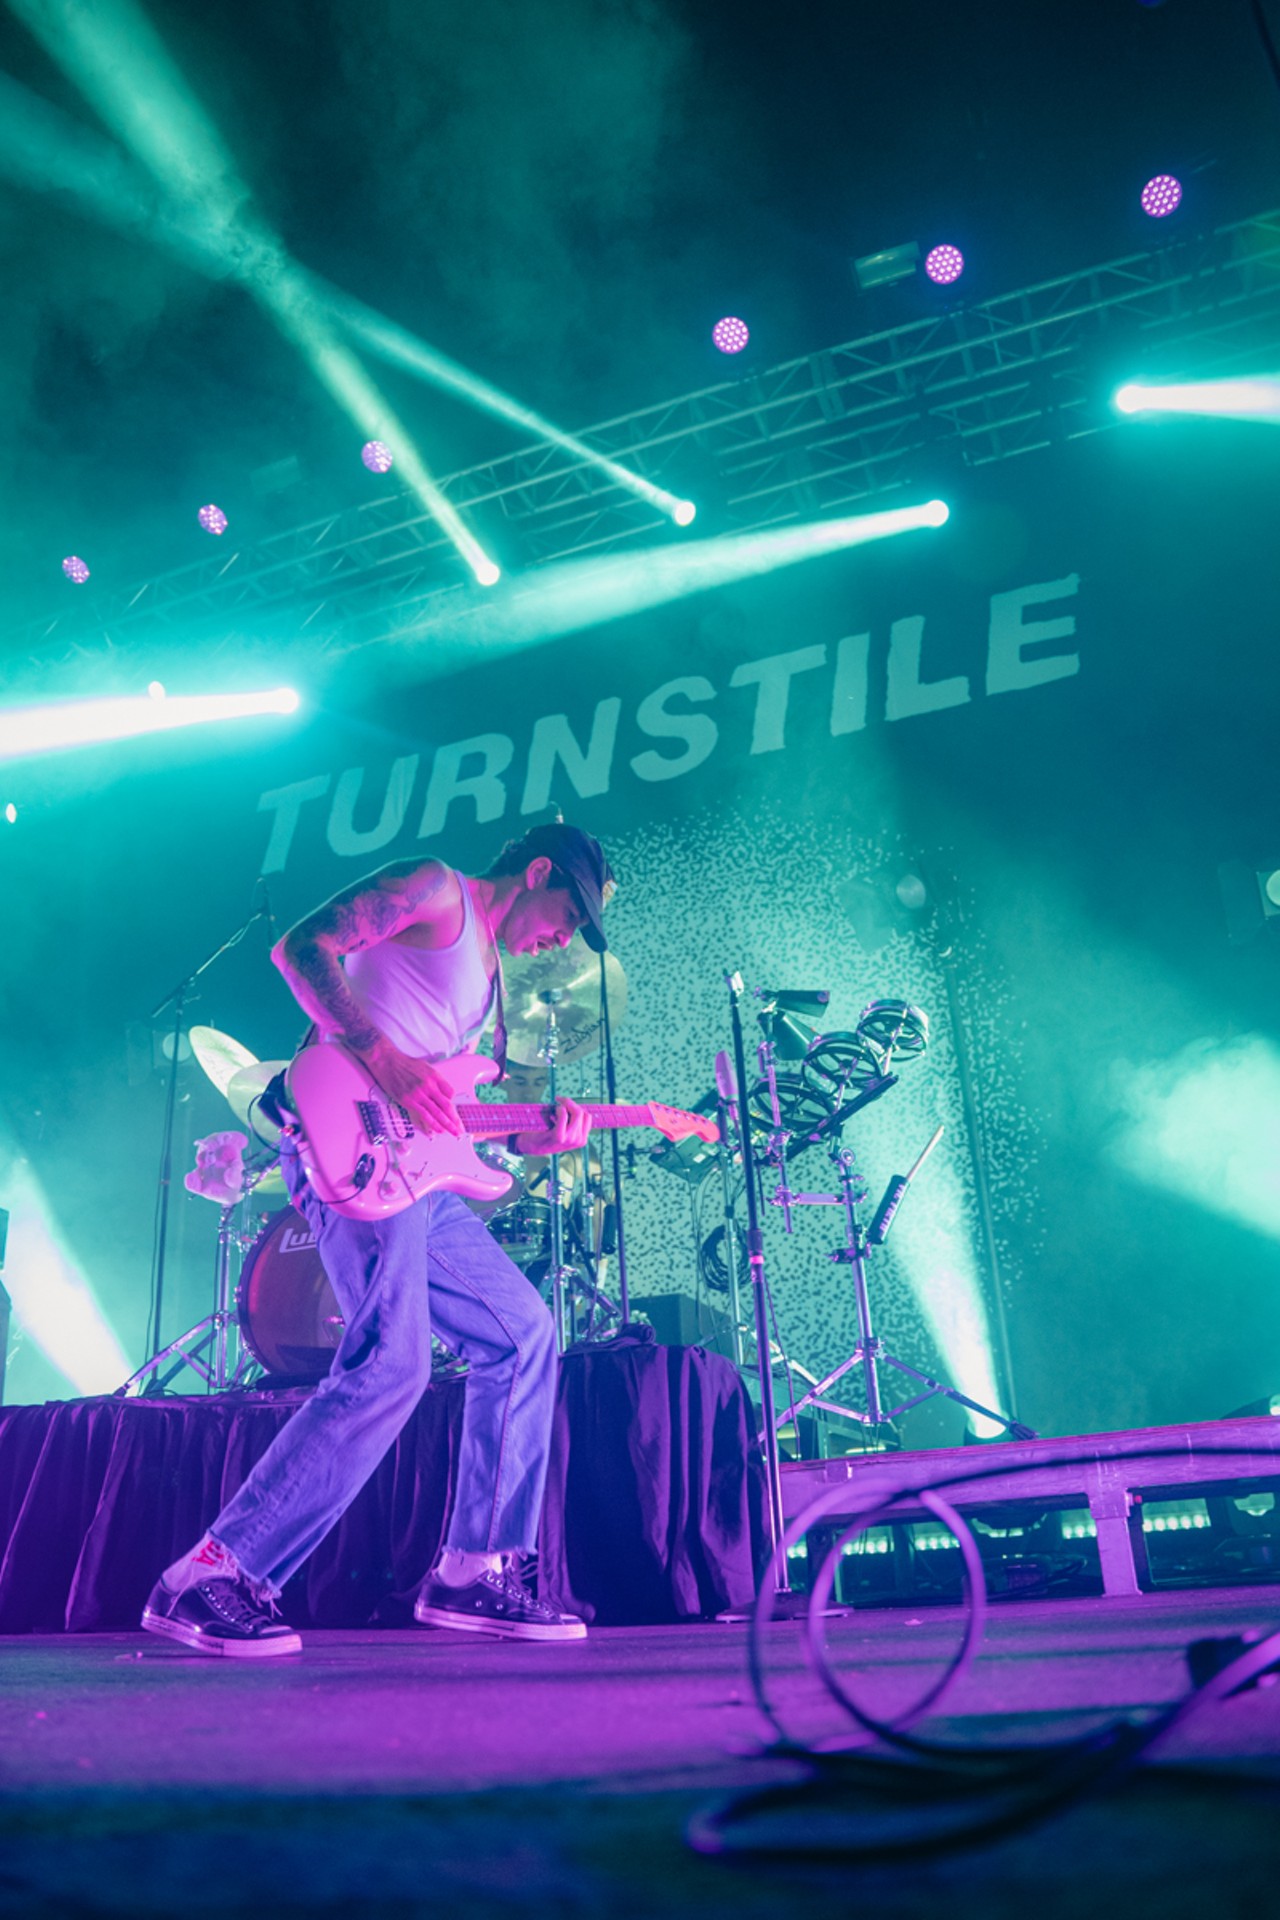 Photos: Turnstile brings its 'Love Connection' to St. Pete's Jannus Live